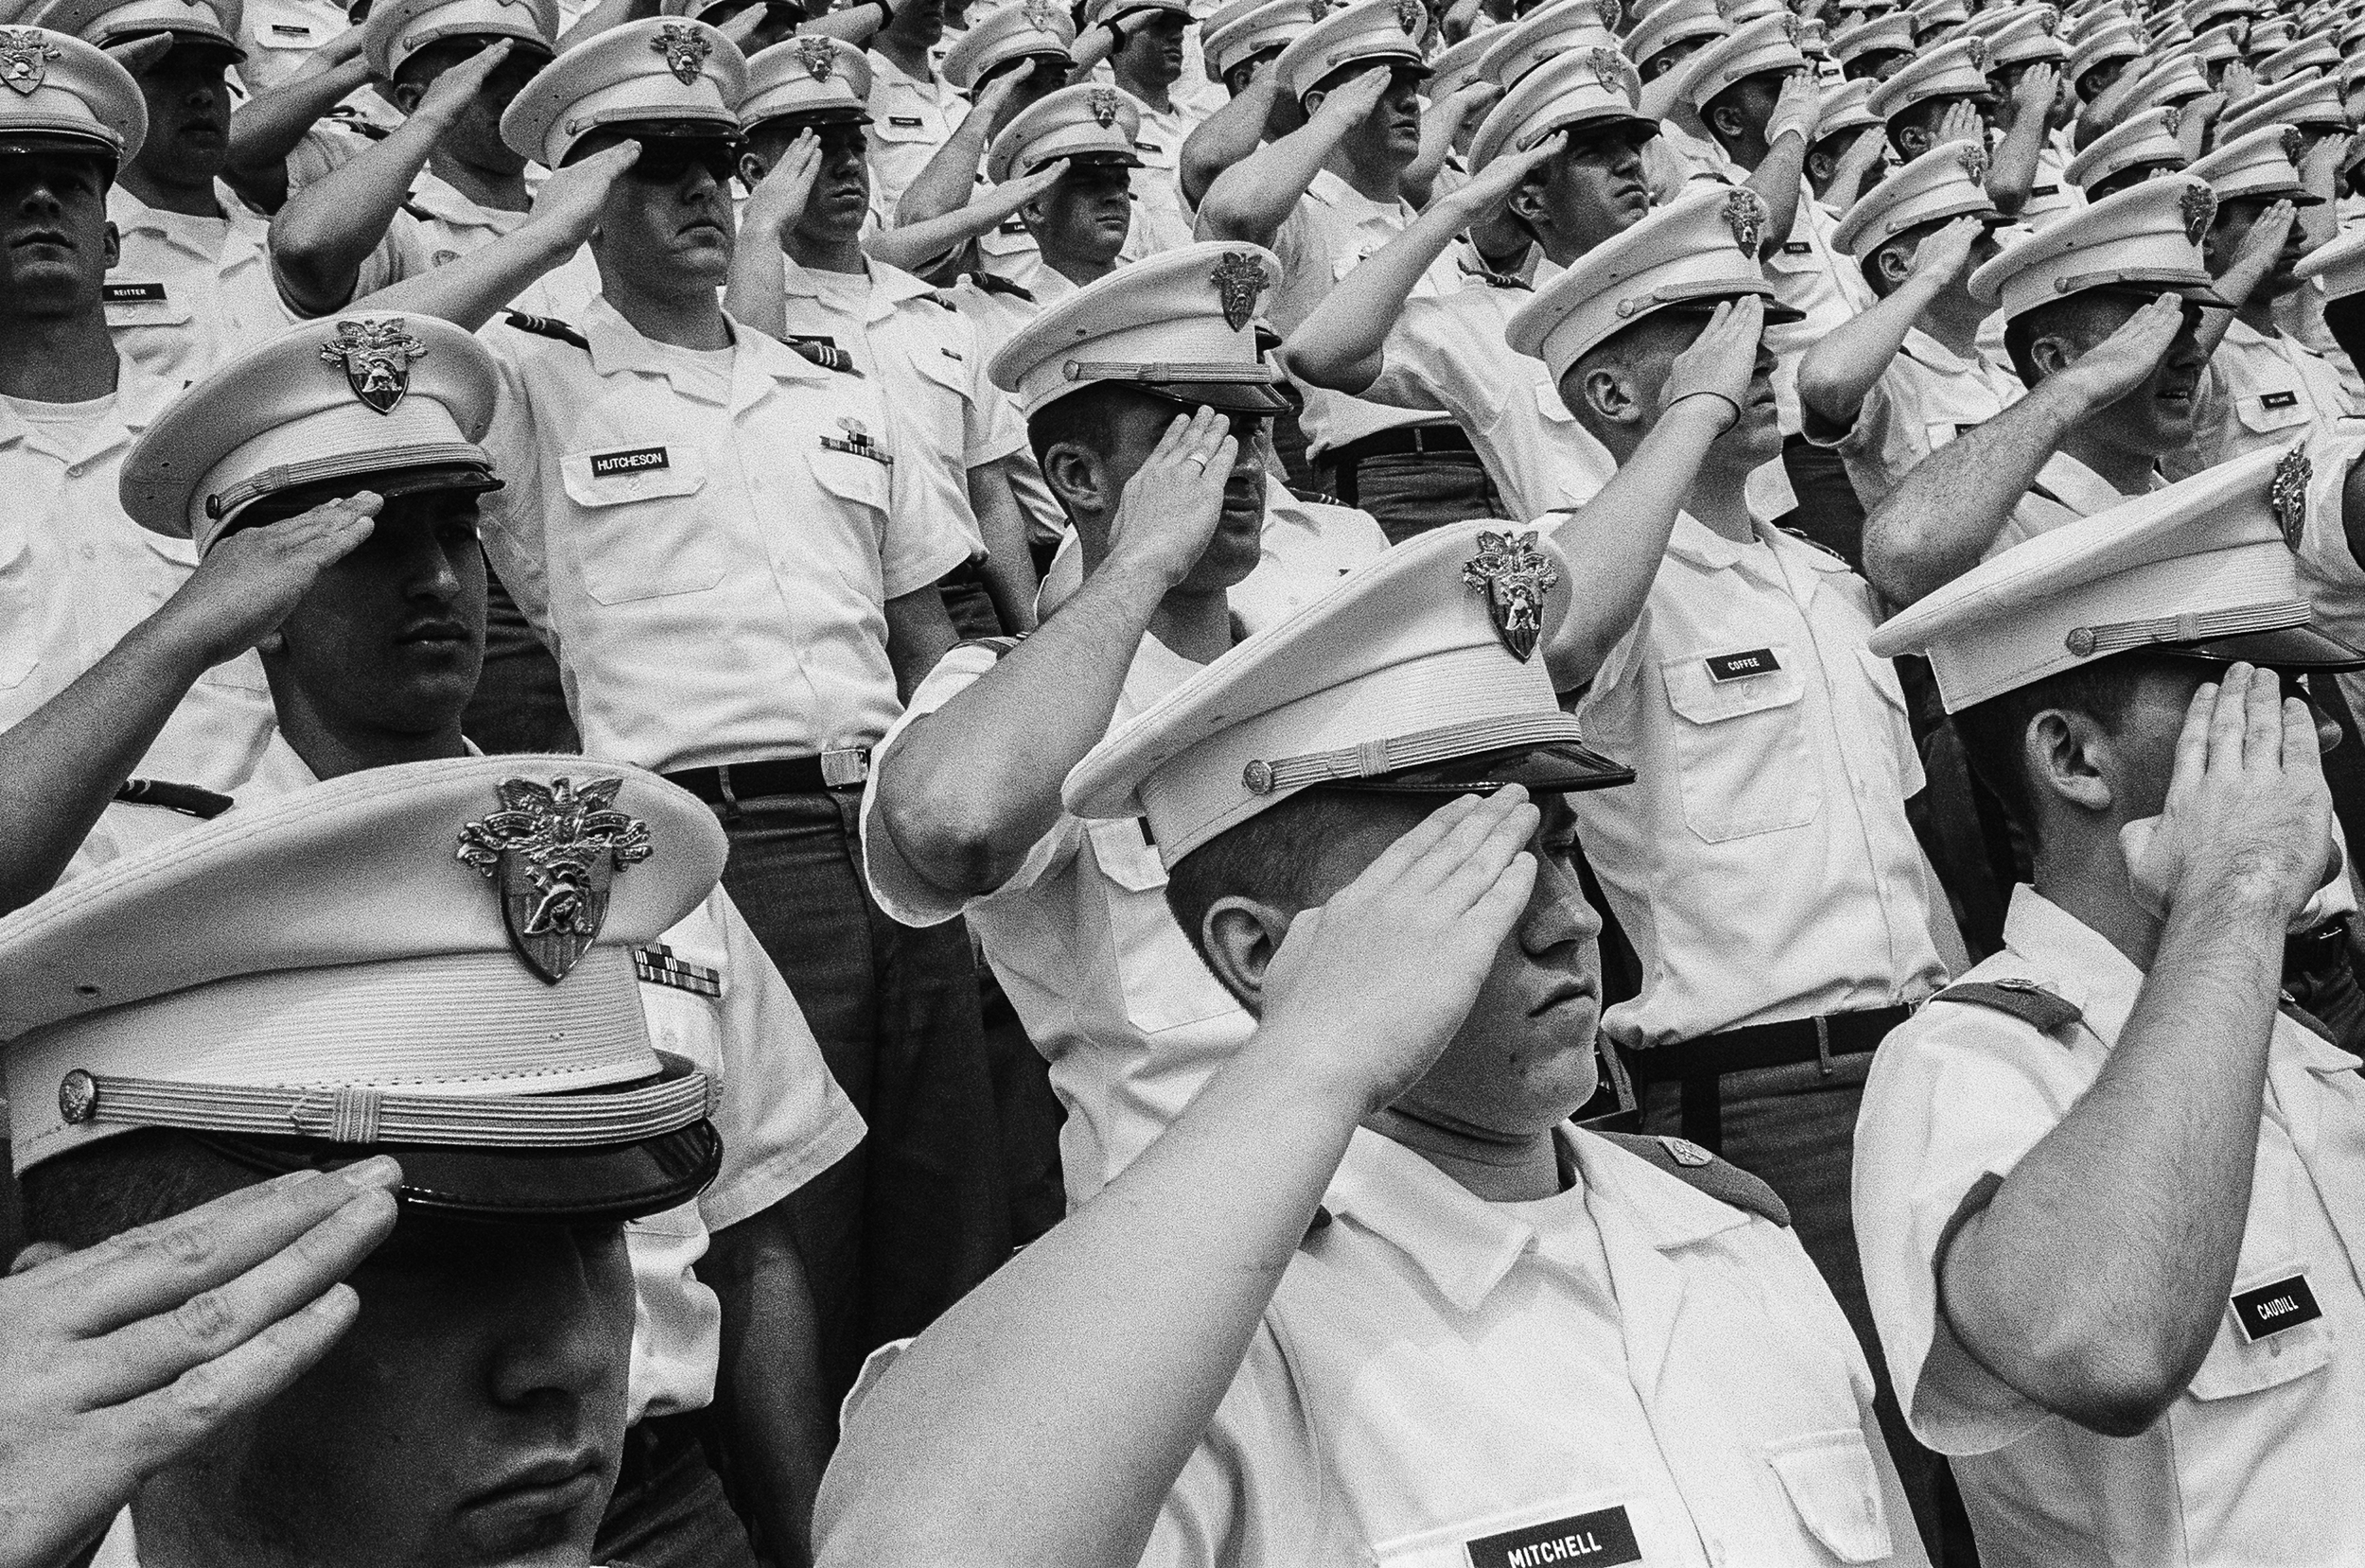  Cadets salute during a graduation ceremony at West Point Military Academy,&nbsp;New York,&nbsp;2010. 